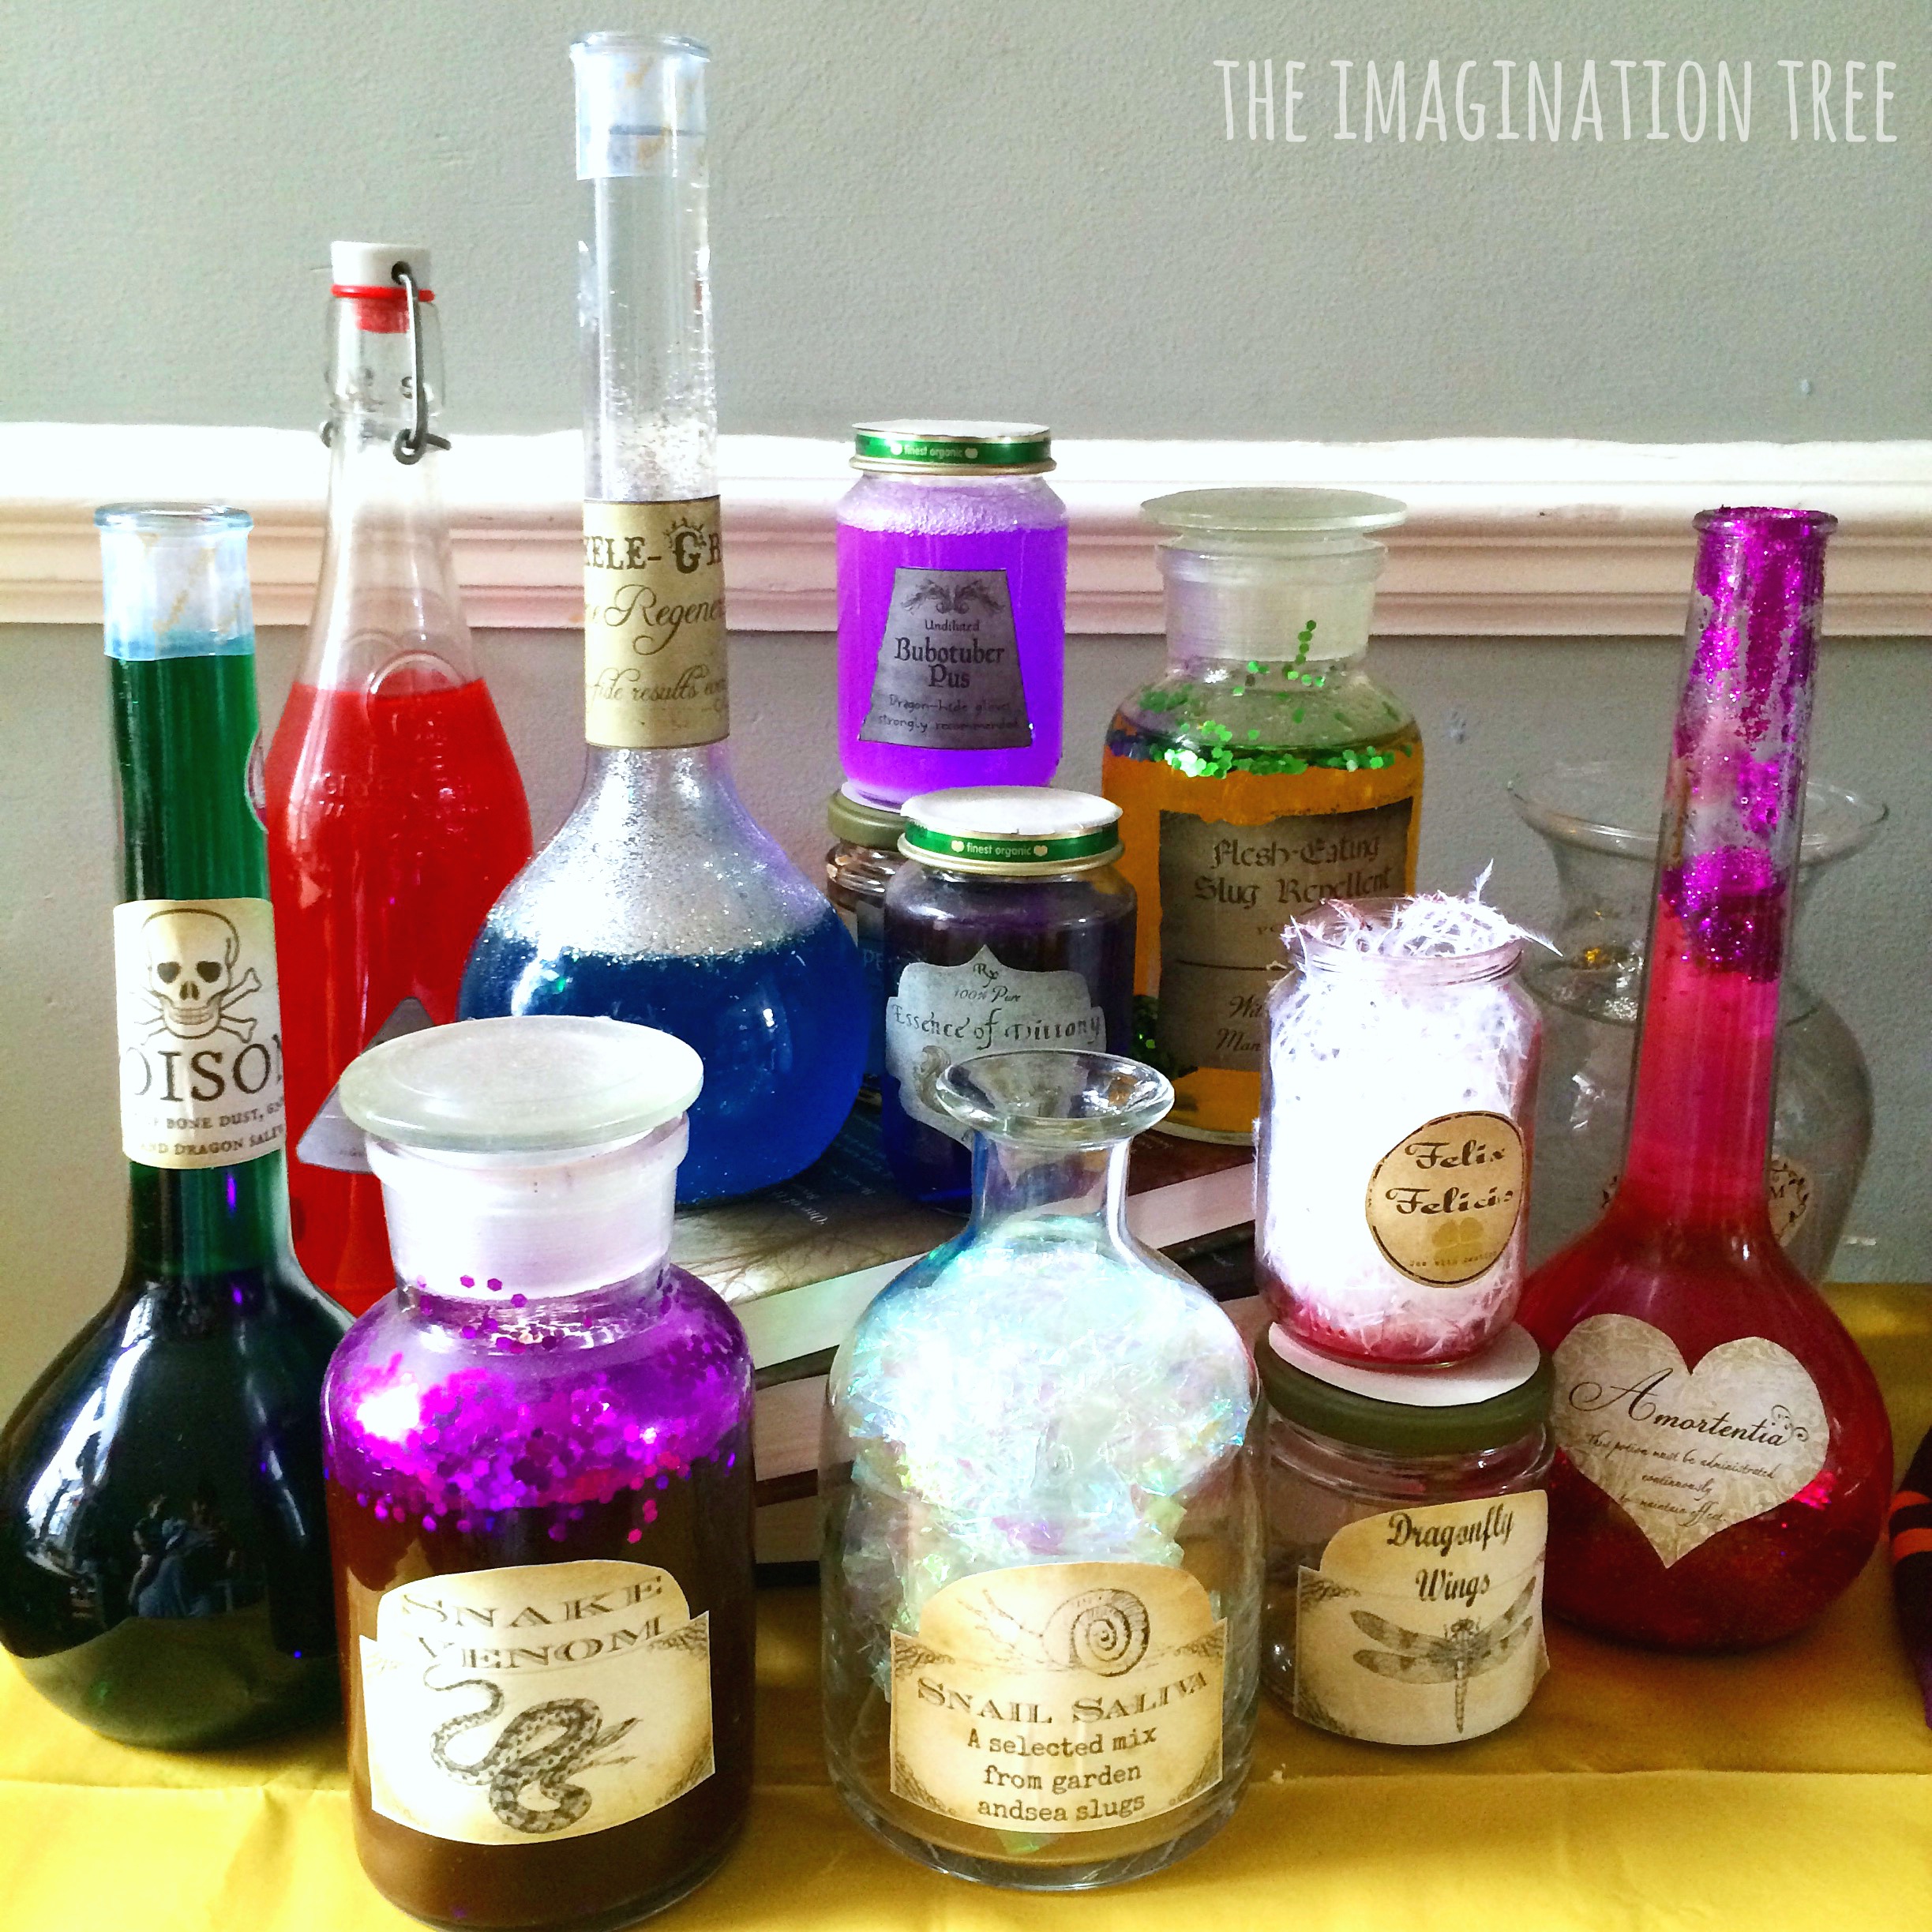 Harry Potter Potions Class Science Activity - The Imagination Tree